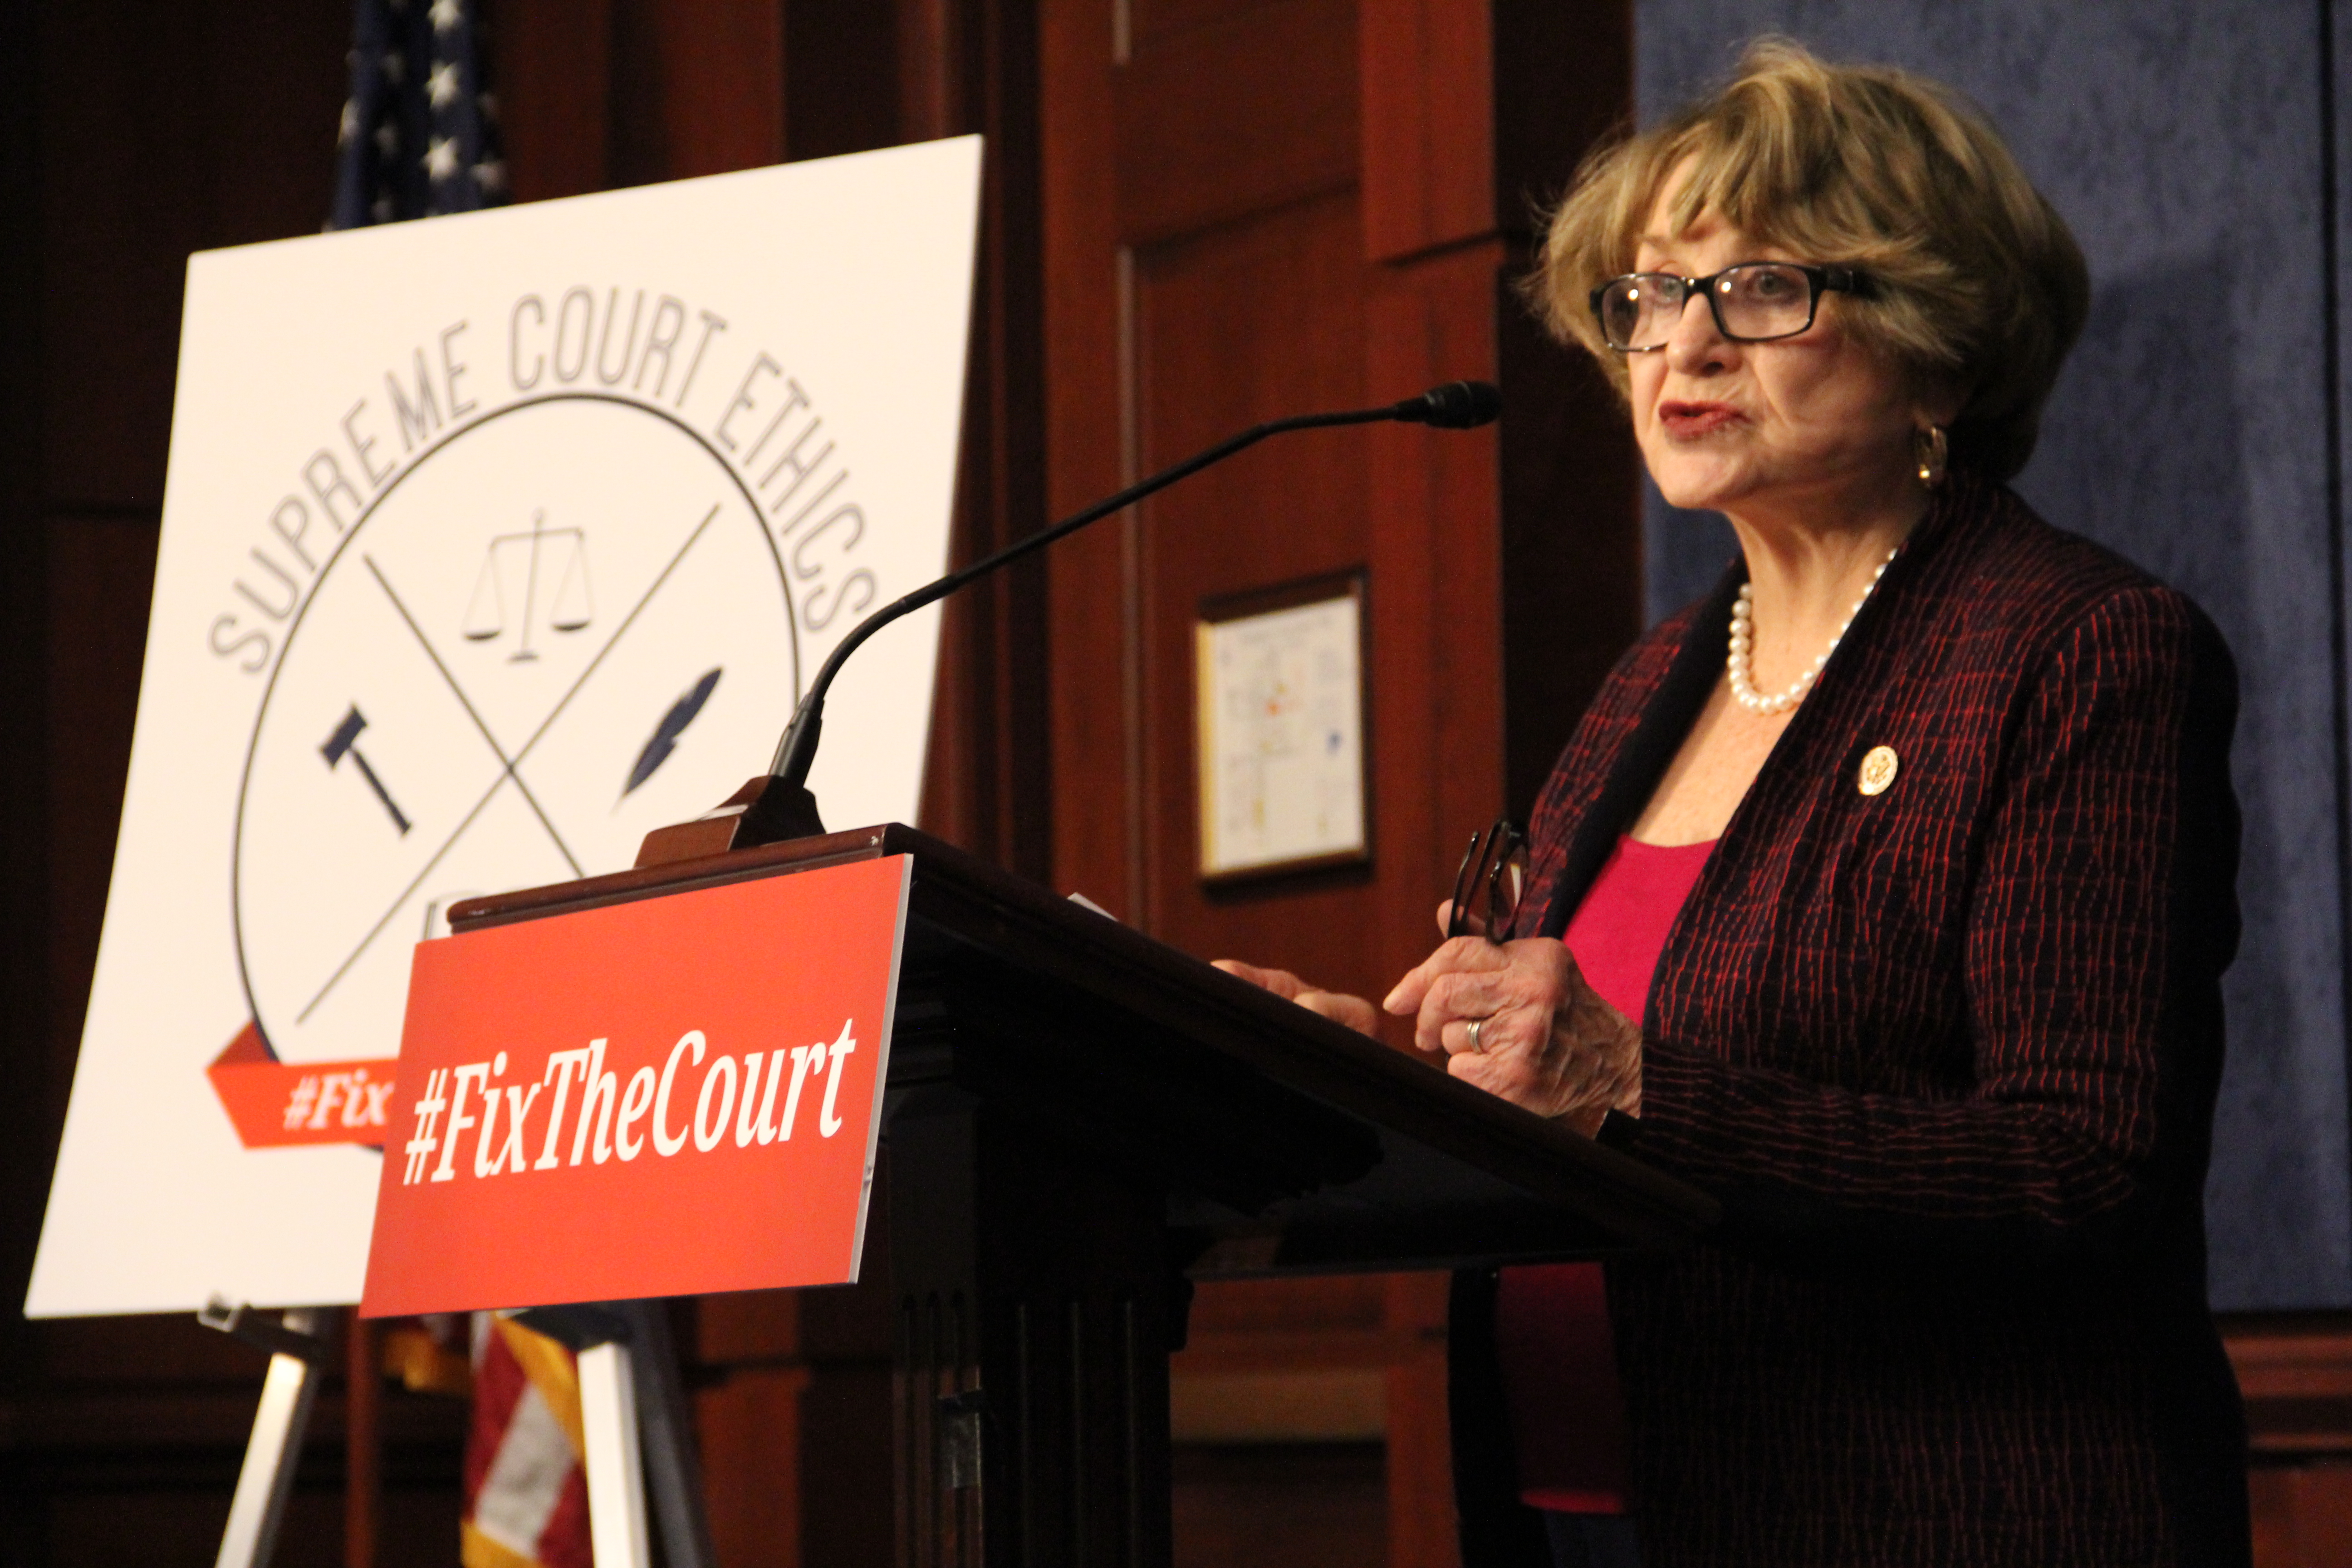 Congresswoman Slaughter Introduces Her Bill, The Supreme Court Ethics Act